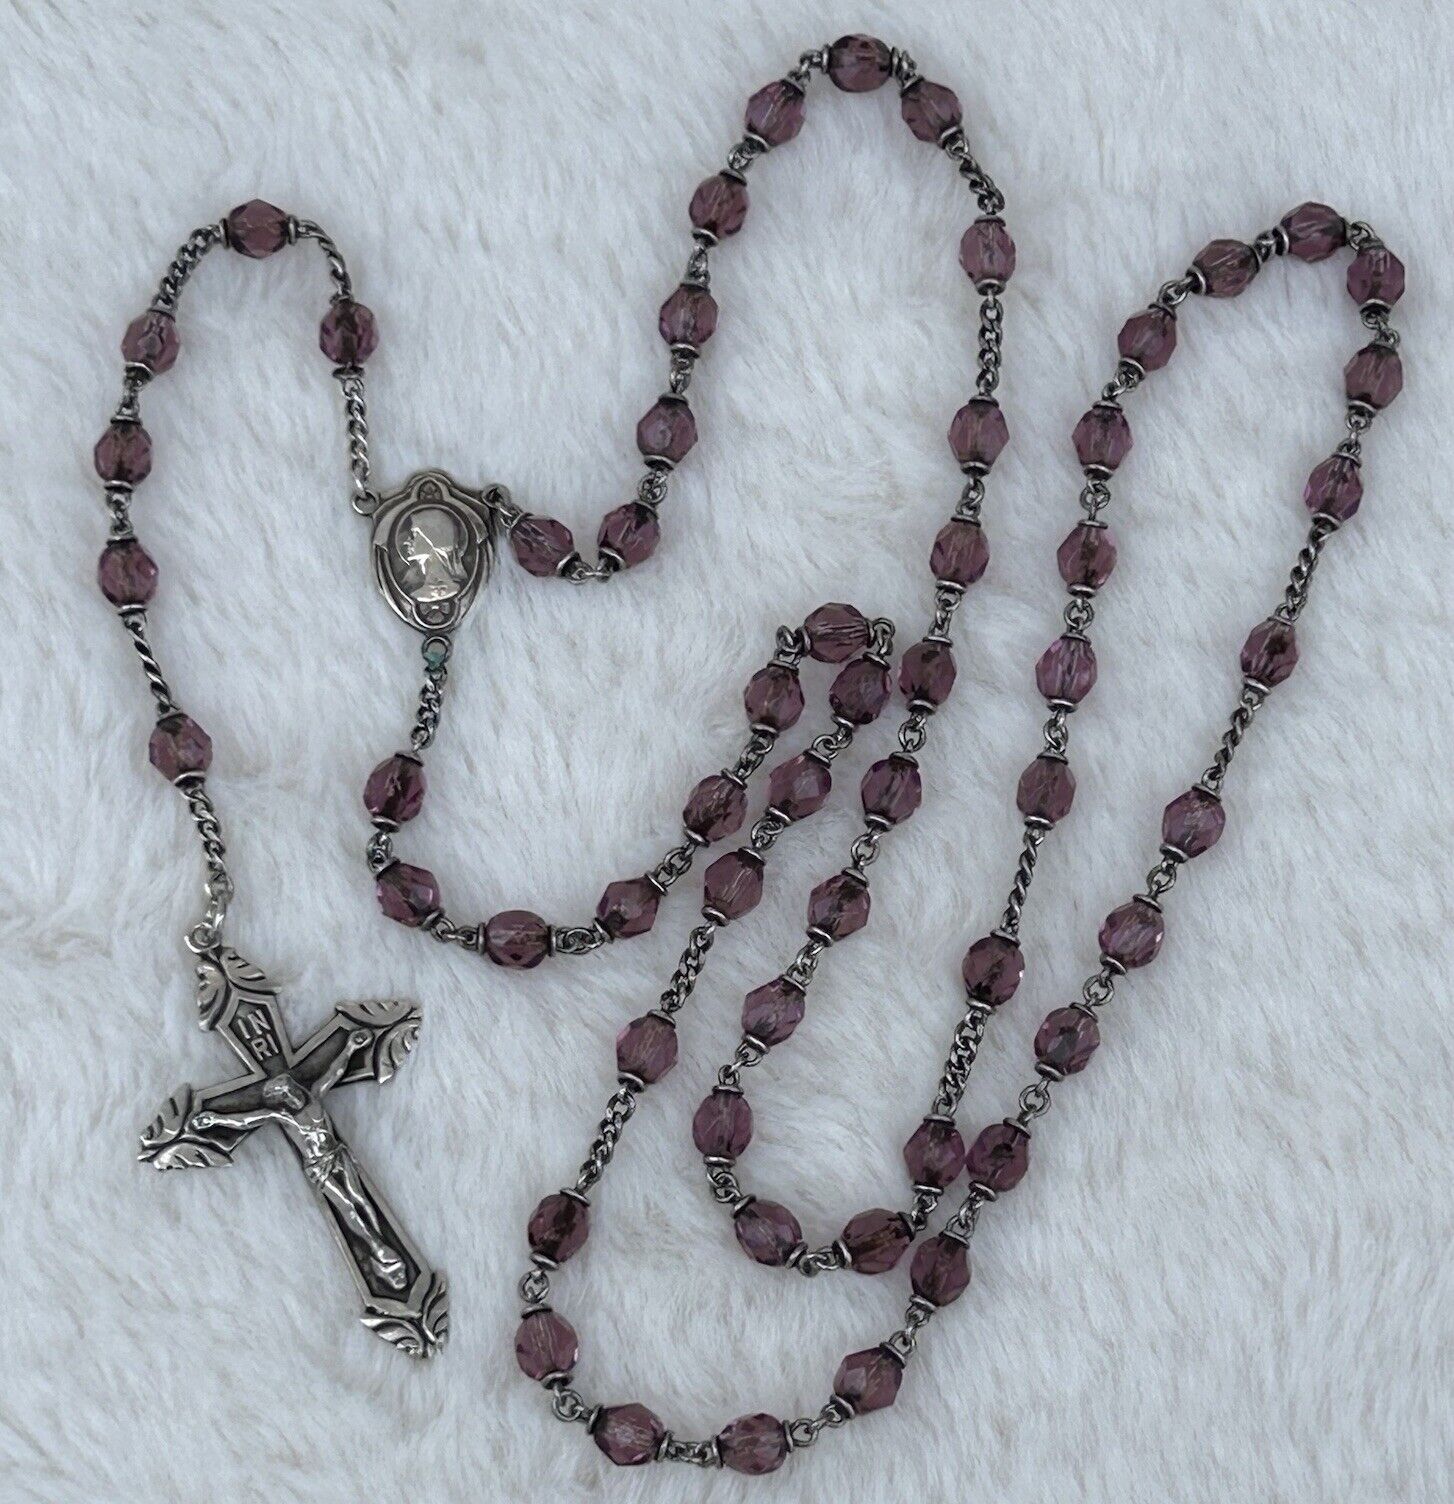 Vintage 925 Sterling Silver FOR SCRAP Rosary Beads 31 GMS